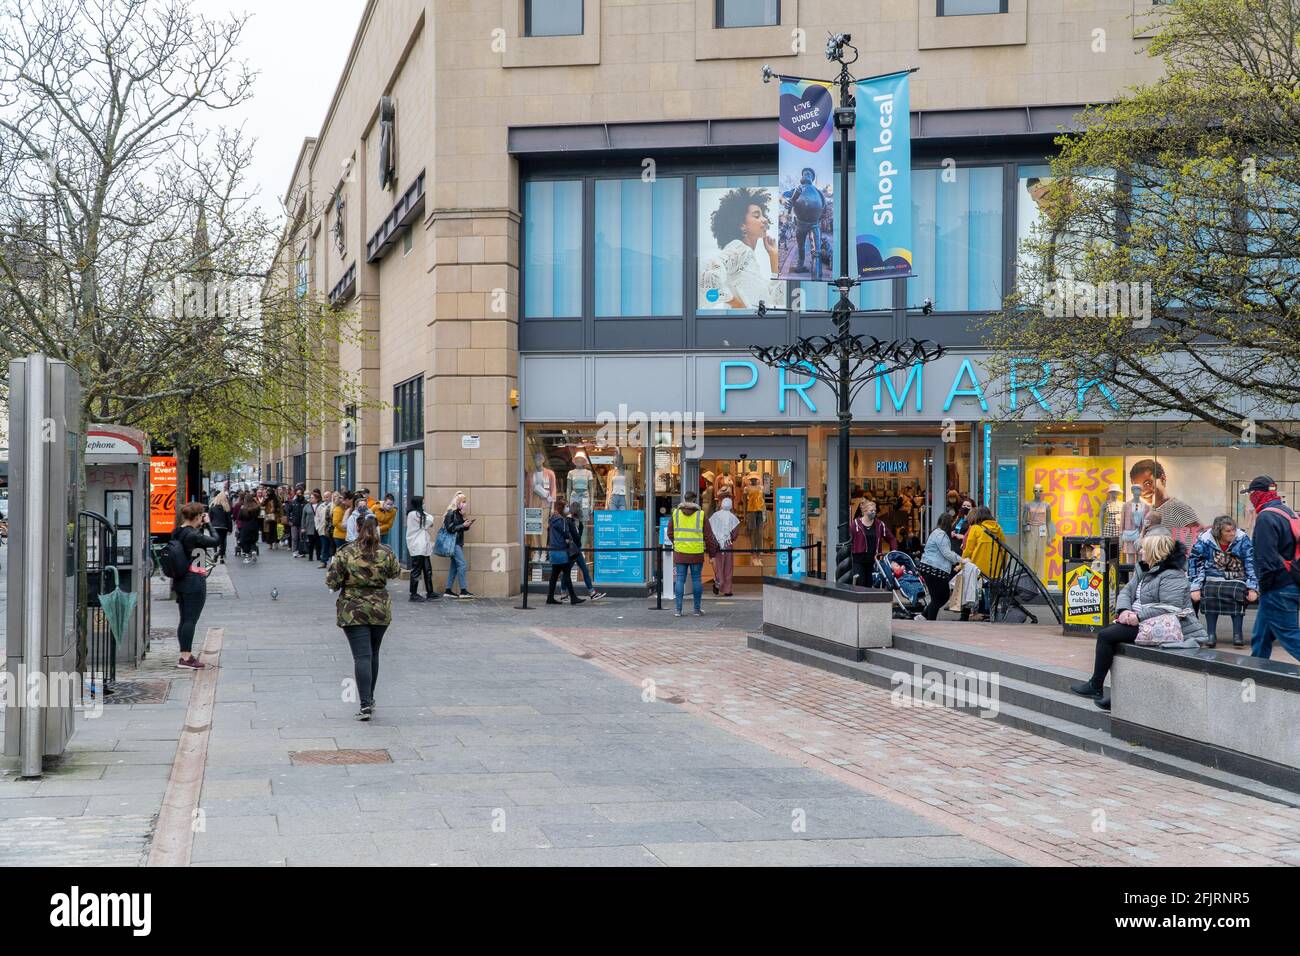 Dundee, Tayside, Scotland 26.04.21: Large queue of people waiting to go shopping in primark, at the overgate shopping centre, Dundee, on the day Scotland moves to stage 3 lockdown, after months of a second lockdown, which seen all shops closed. Credit: Barry Nixon Stable Air Media/Alamy Live News Stock Photo